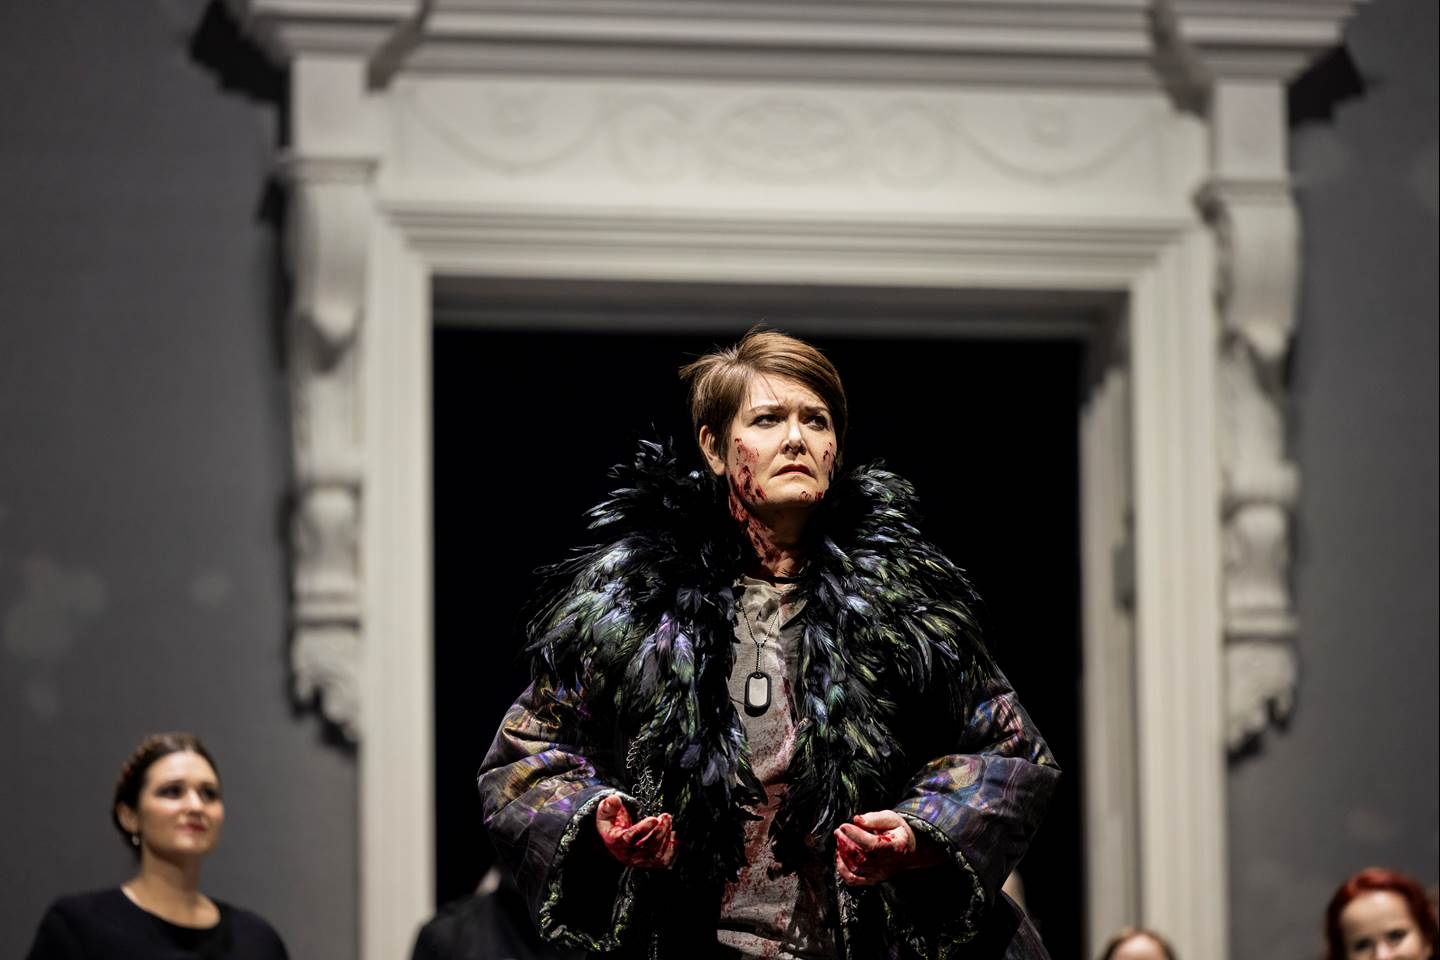 A woman in a feathered jacked with blood all over from the opera Idomeneo